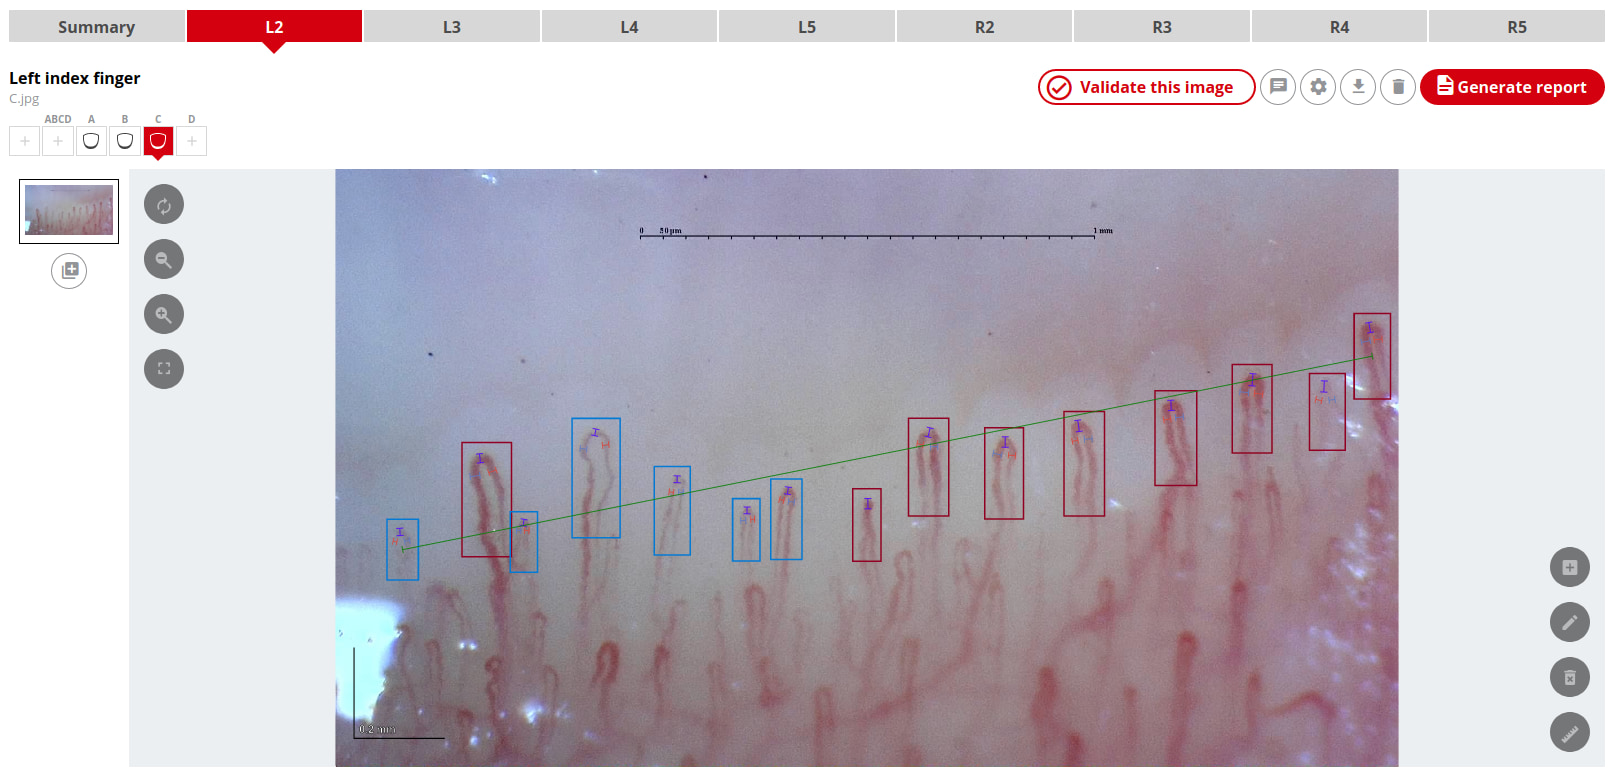 Capillary.io’s system automates capillary detection, measurement, and classification in all of your nailfold capillaroscopy images.